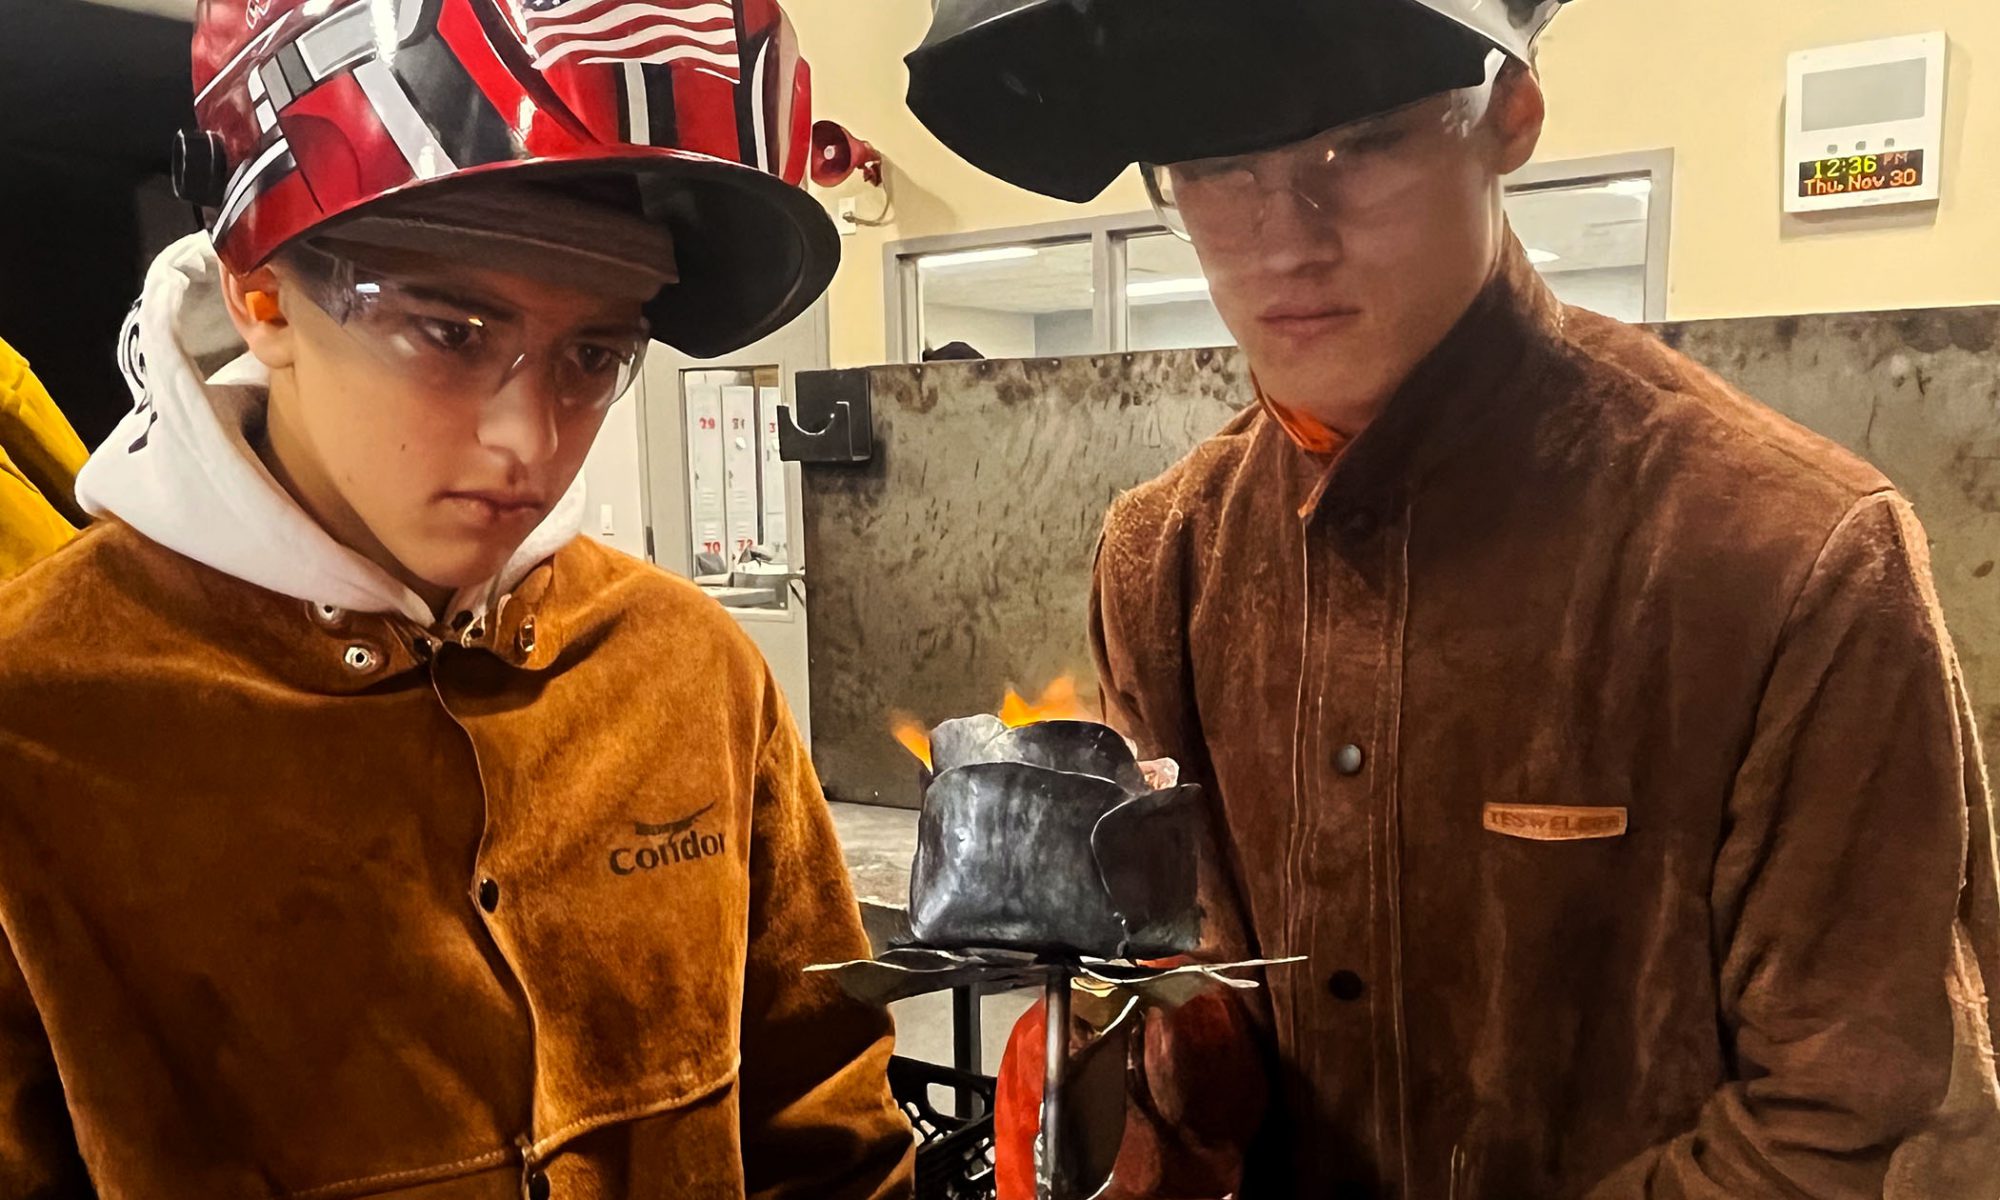 Two students in welding helmets hold a freshly fabricated metal rose that still carries a flame.